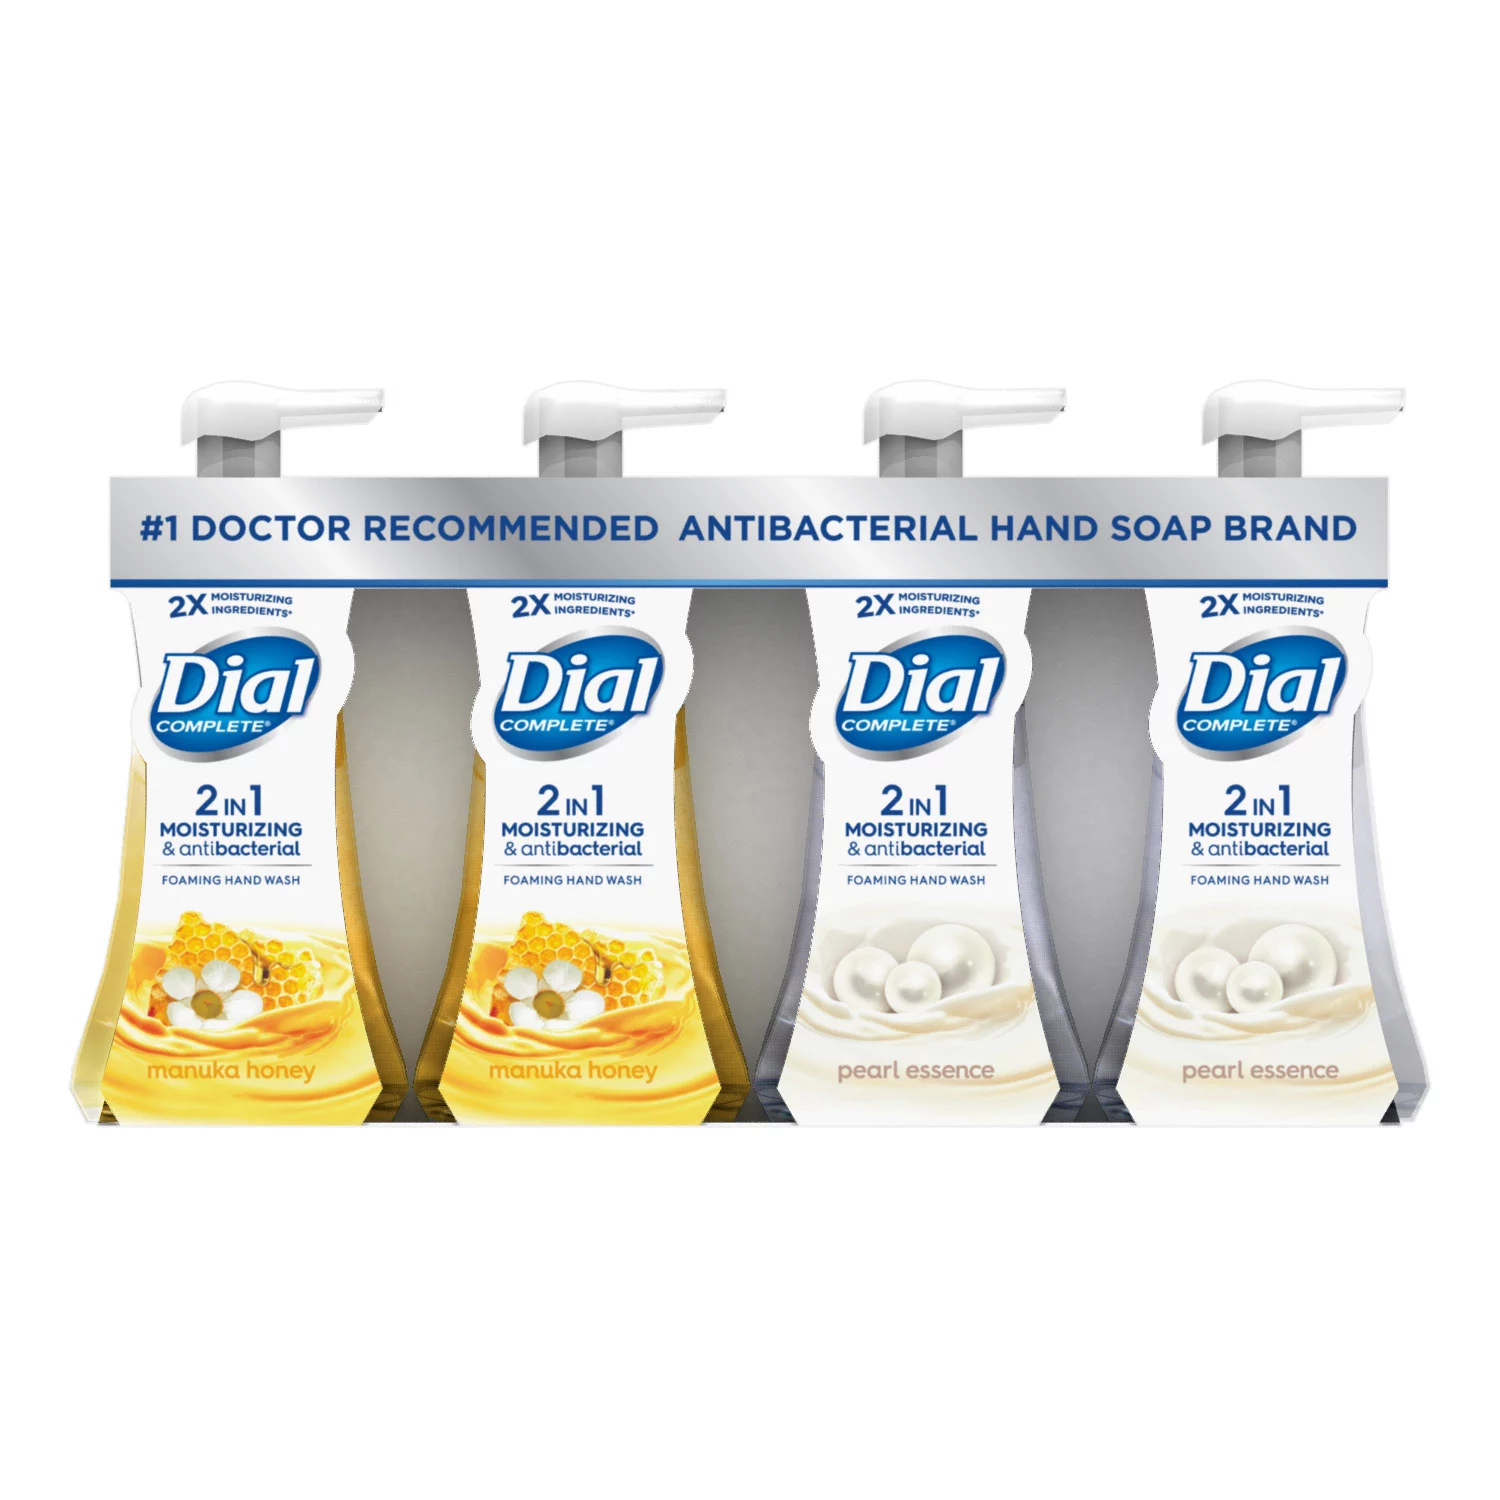 Dial Complete 2 in 1 Foaming Hand Wash (7.5 fl. oz., 4 pk.)